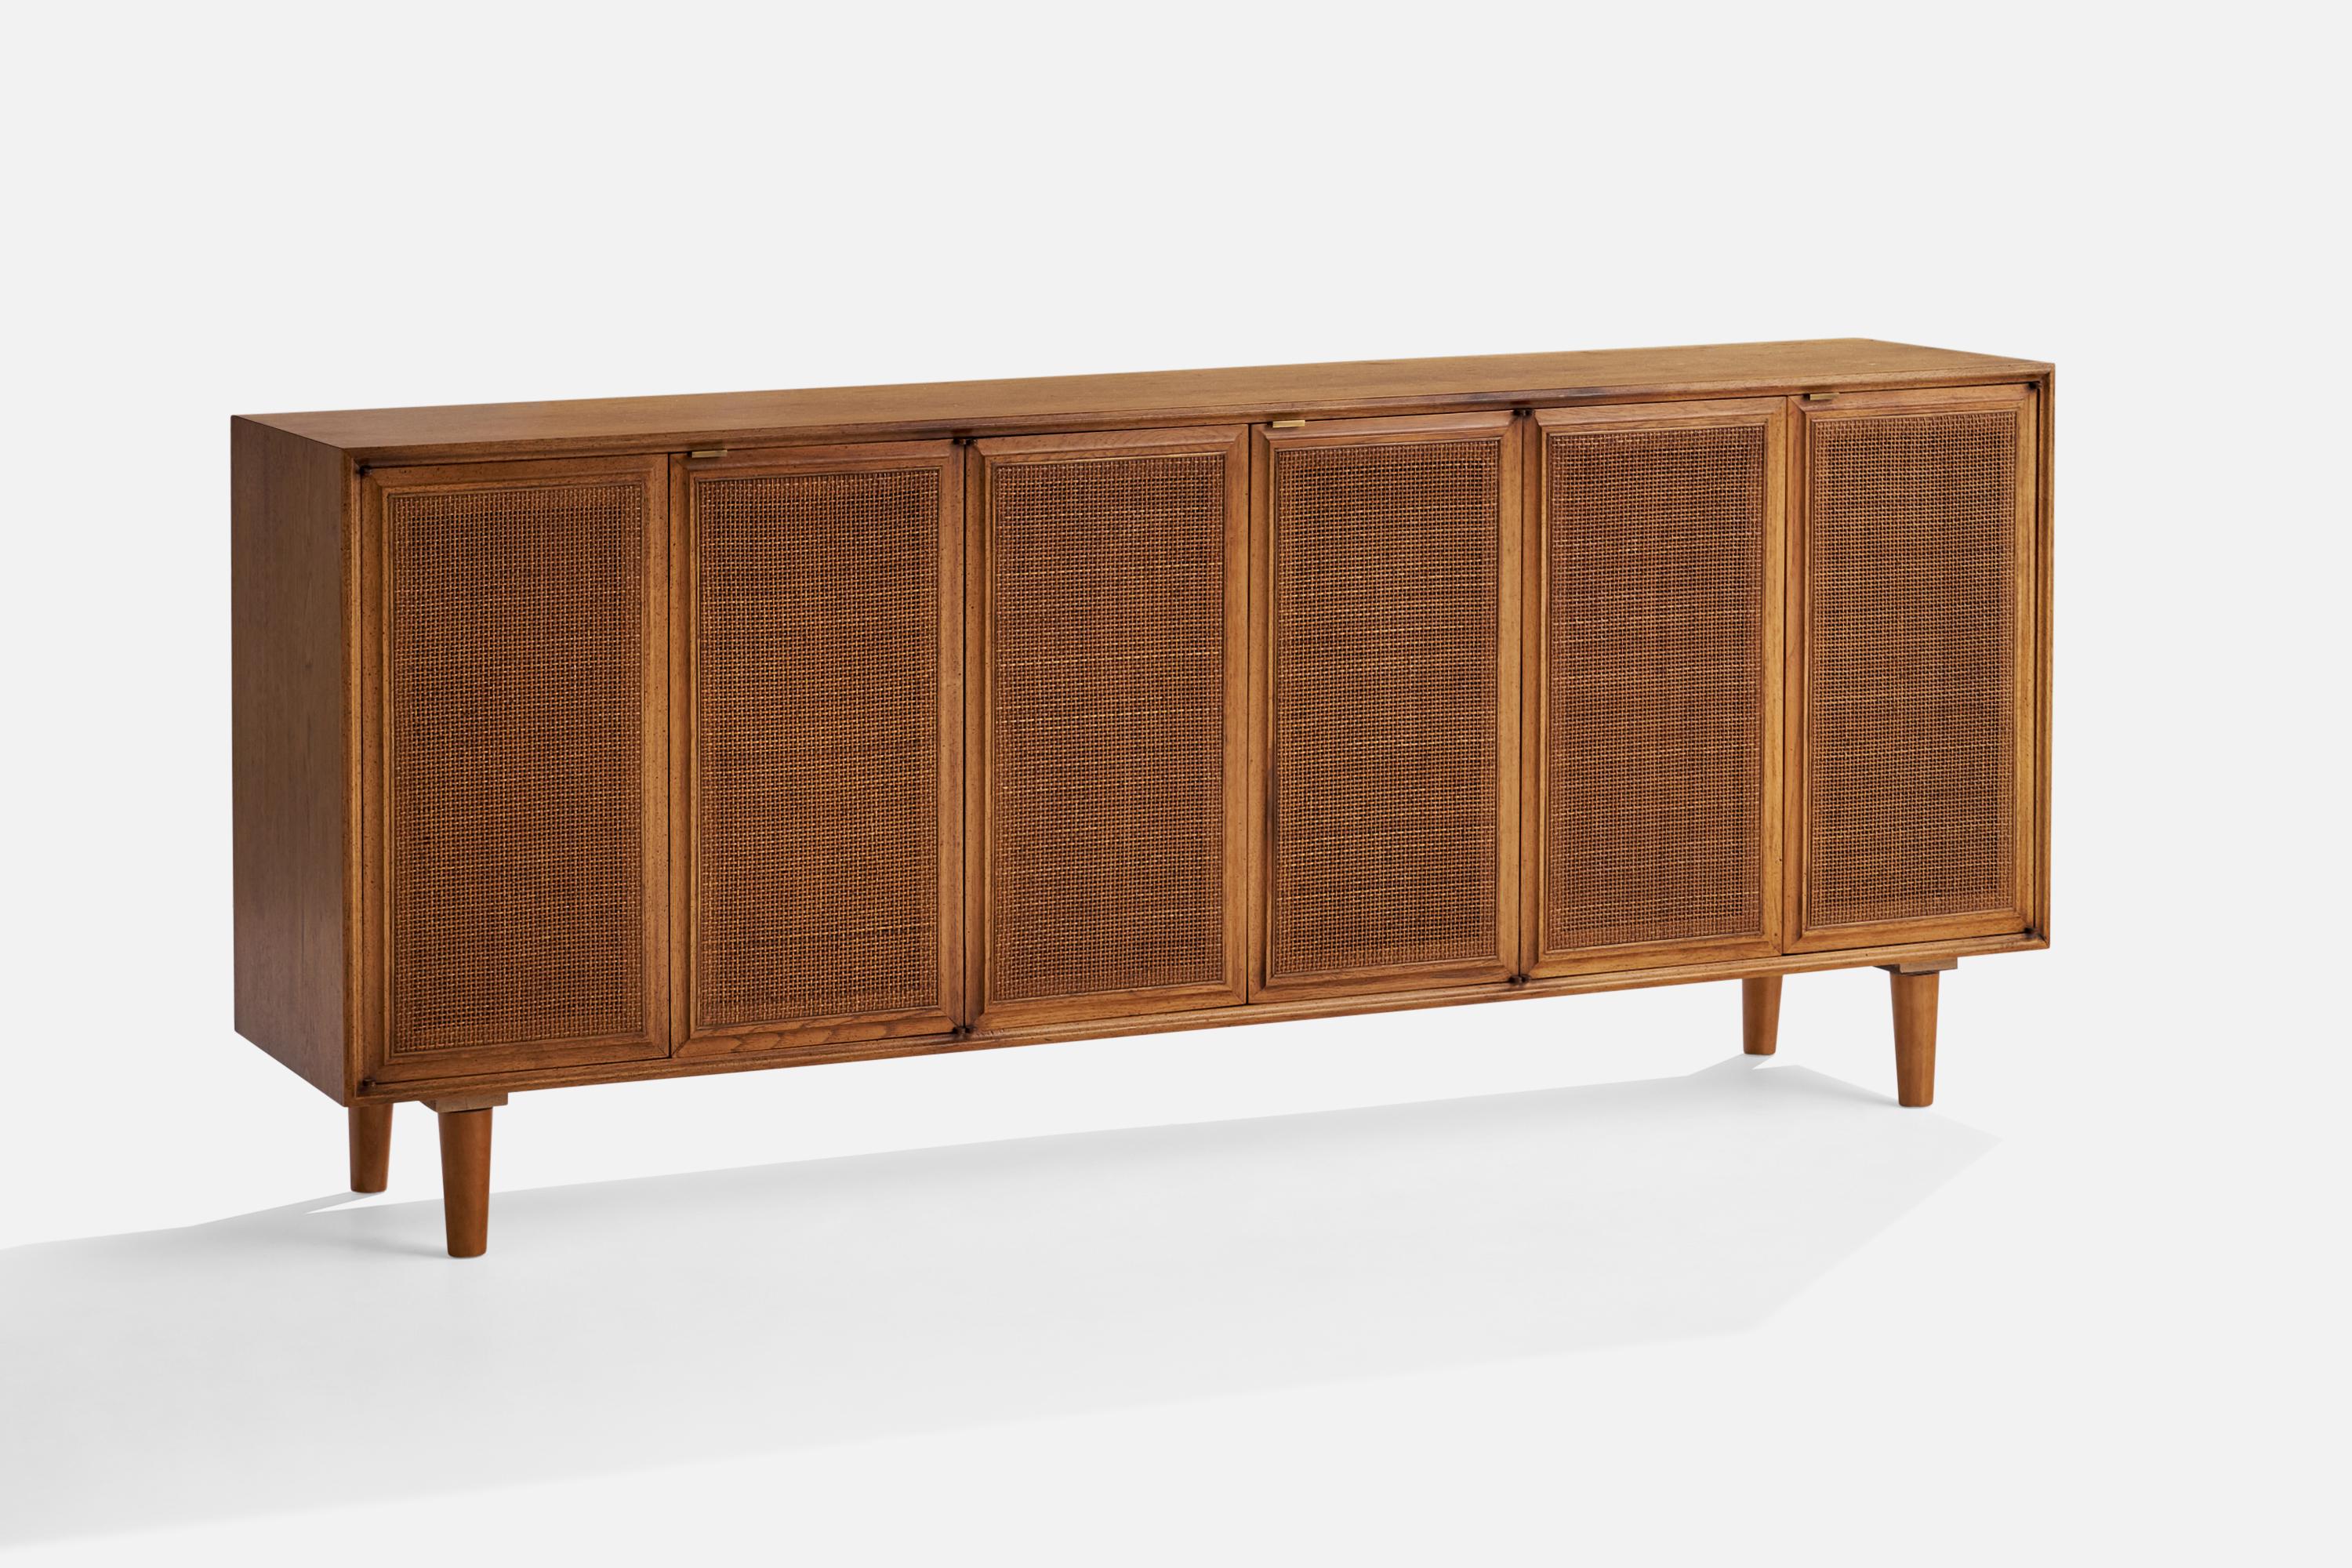 A walnut and woven rattan cabinet or credenza designed and produced in the US, 1950s.